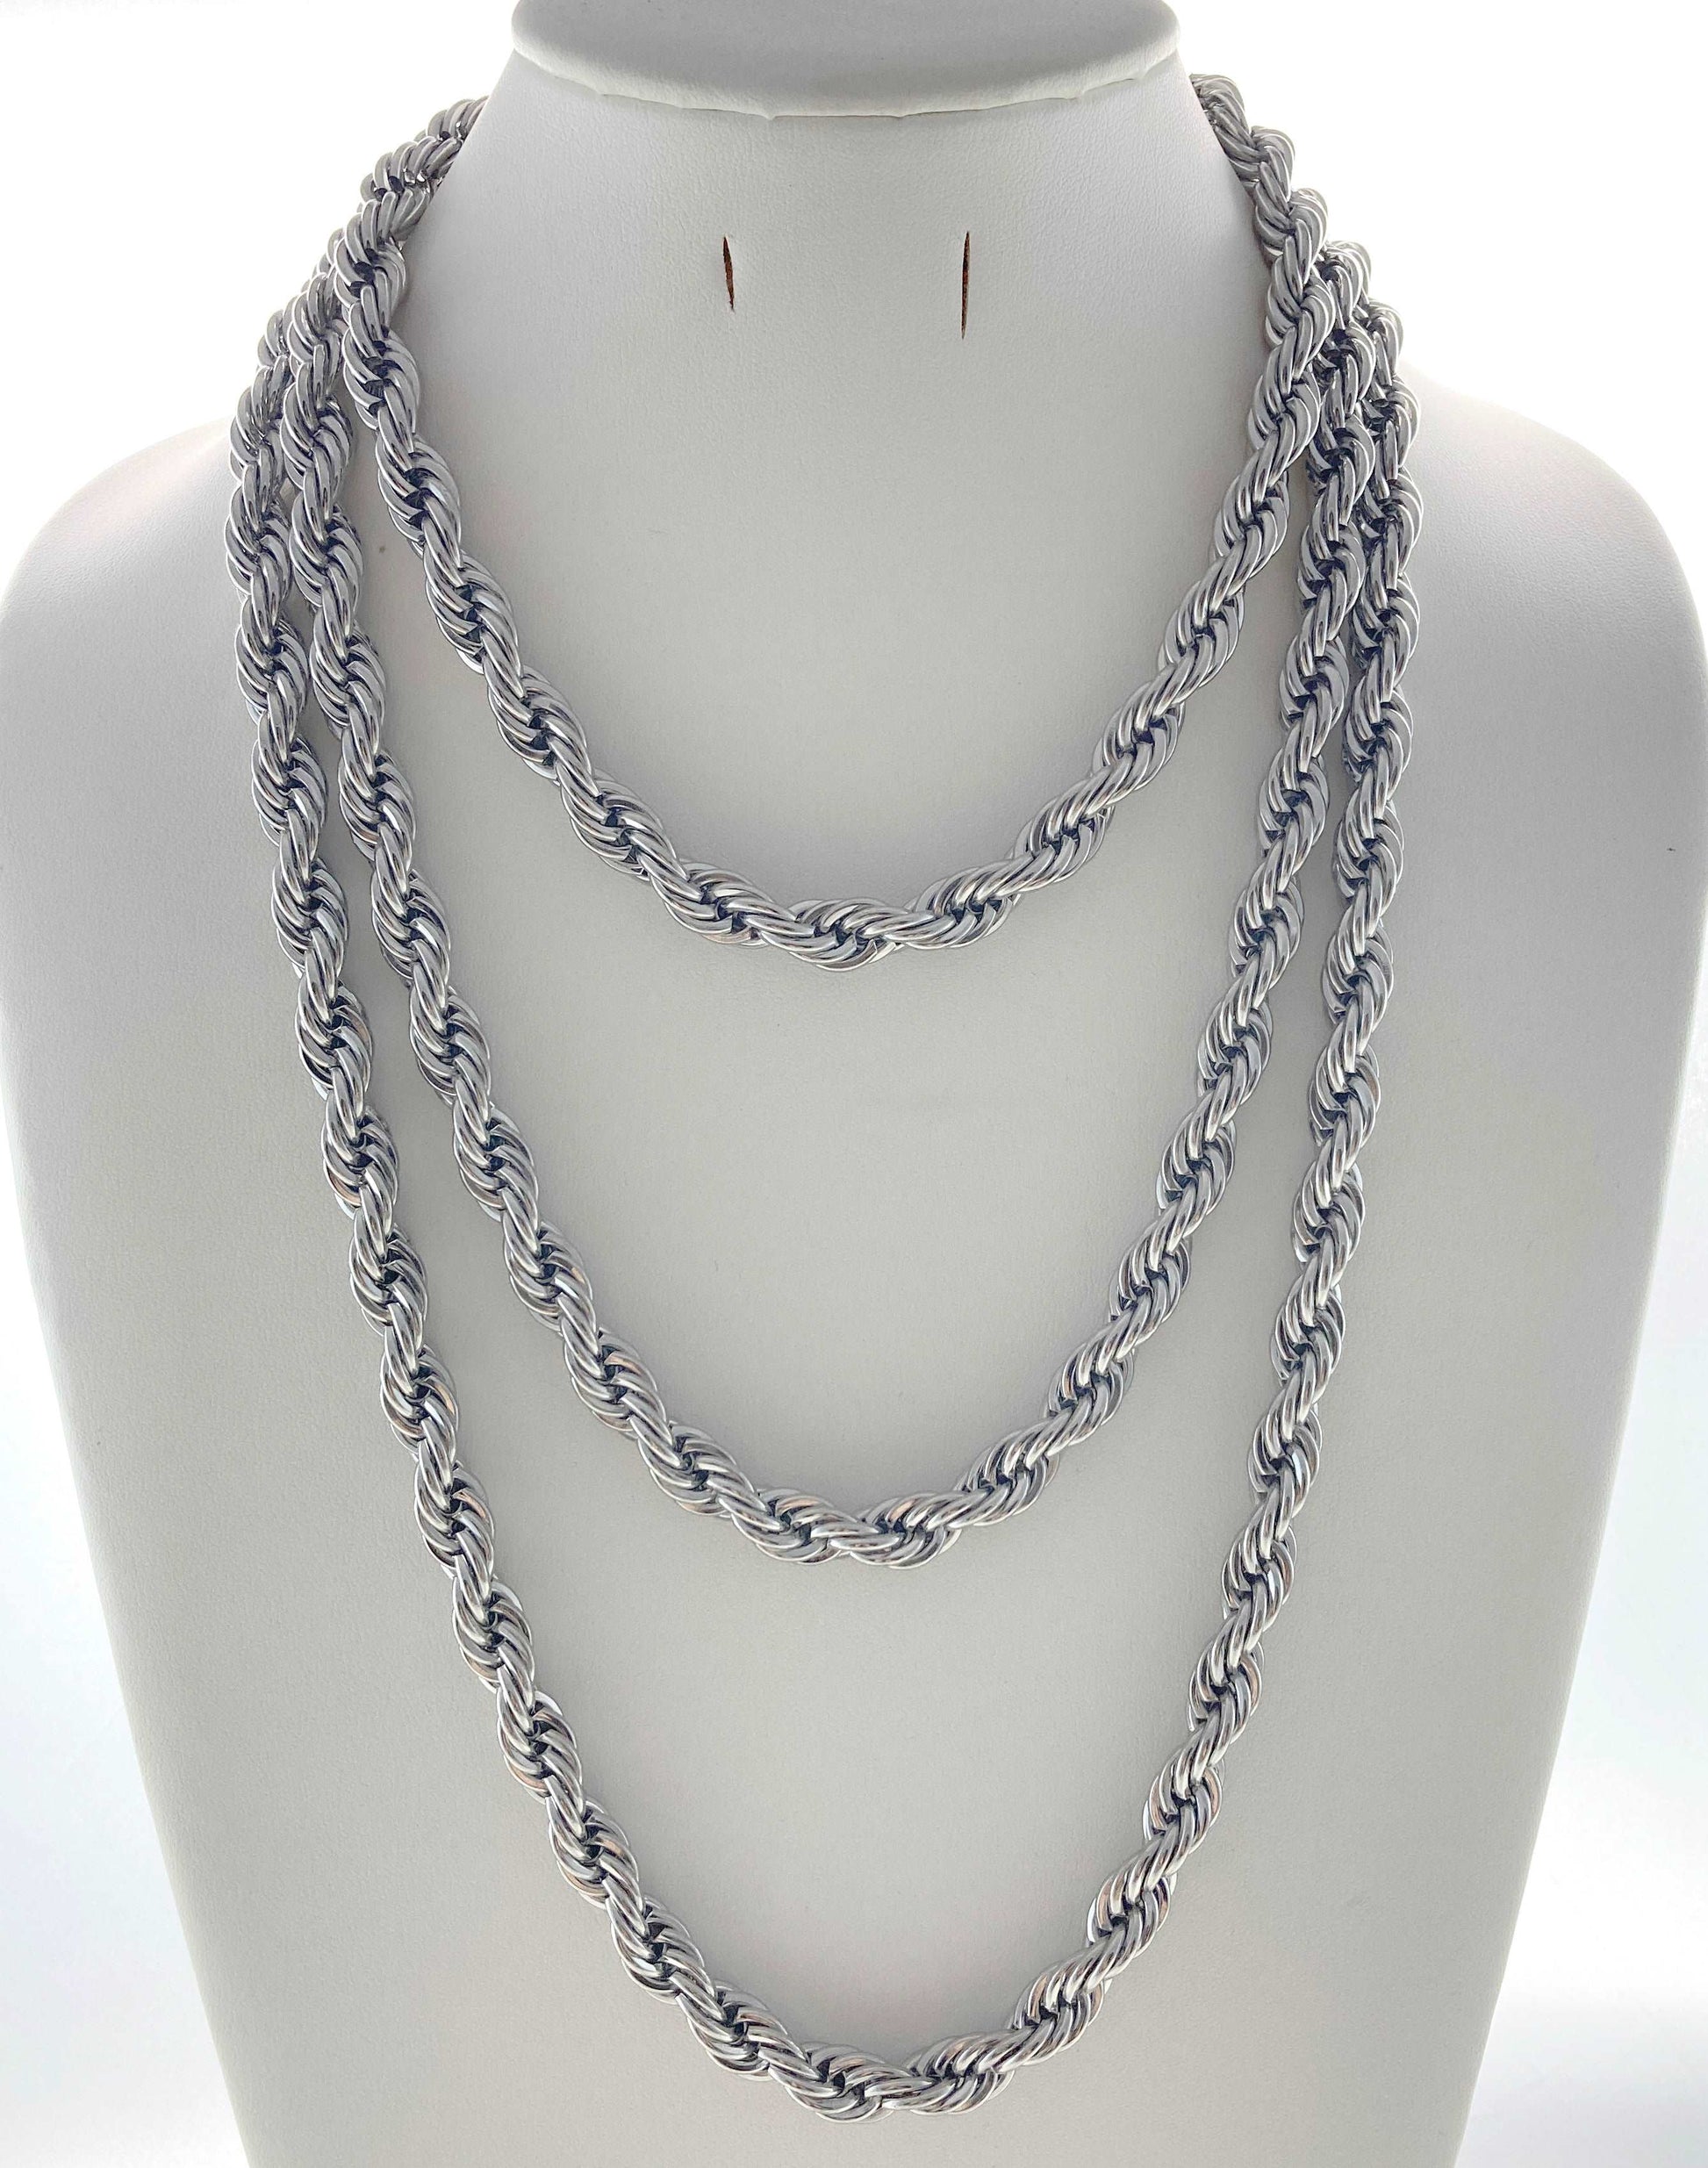 Stainless Steel wide width Neck Chain Unisex in Gold and Silver Finishes - Providence silver gold jewelry usa